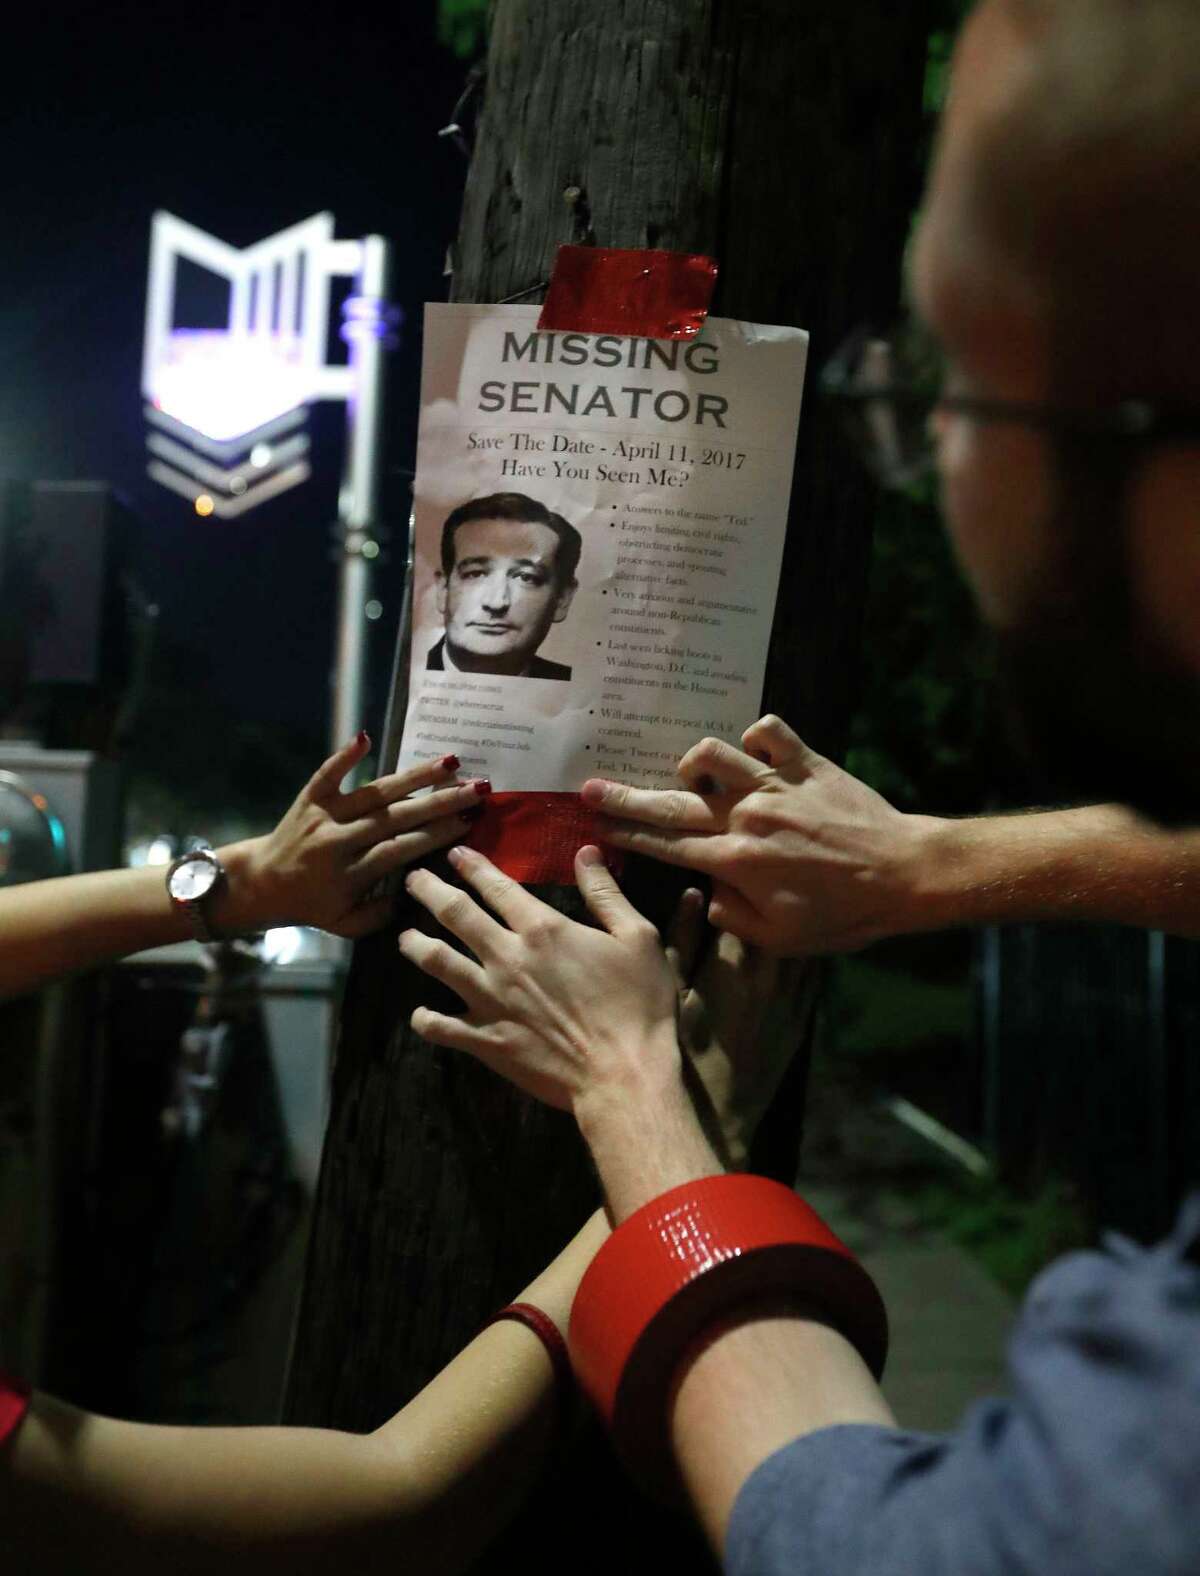 Using signature red duct tape, Houstonians put up "Ted Cruz is missing" fliers up around a Montrose neighborhood, Wednesday, March 29, 2017, in Houston. The fliers are catching people's attention, ahead of an upcoming "Ted Cruz Is Missing" town hall meeting.